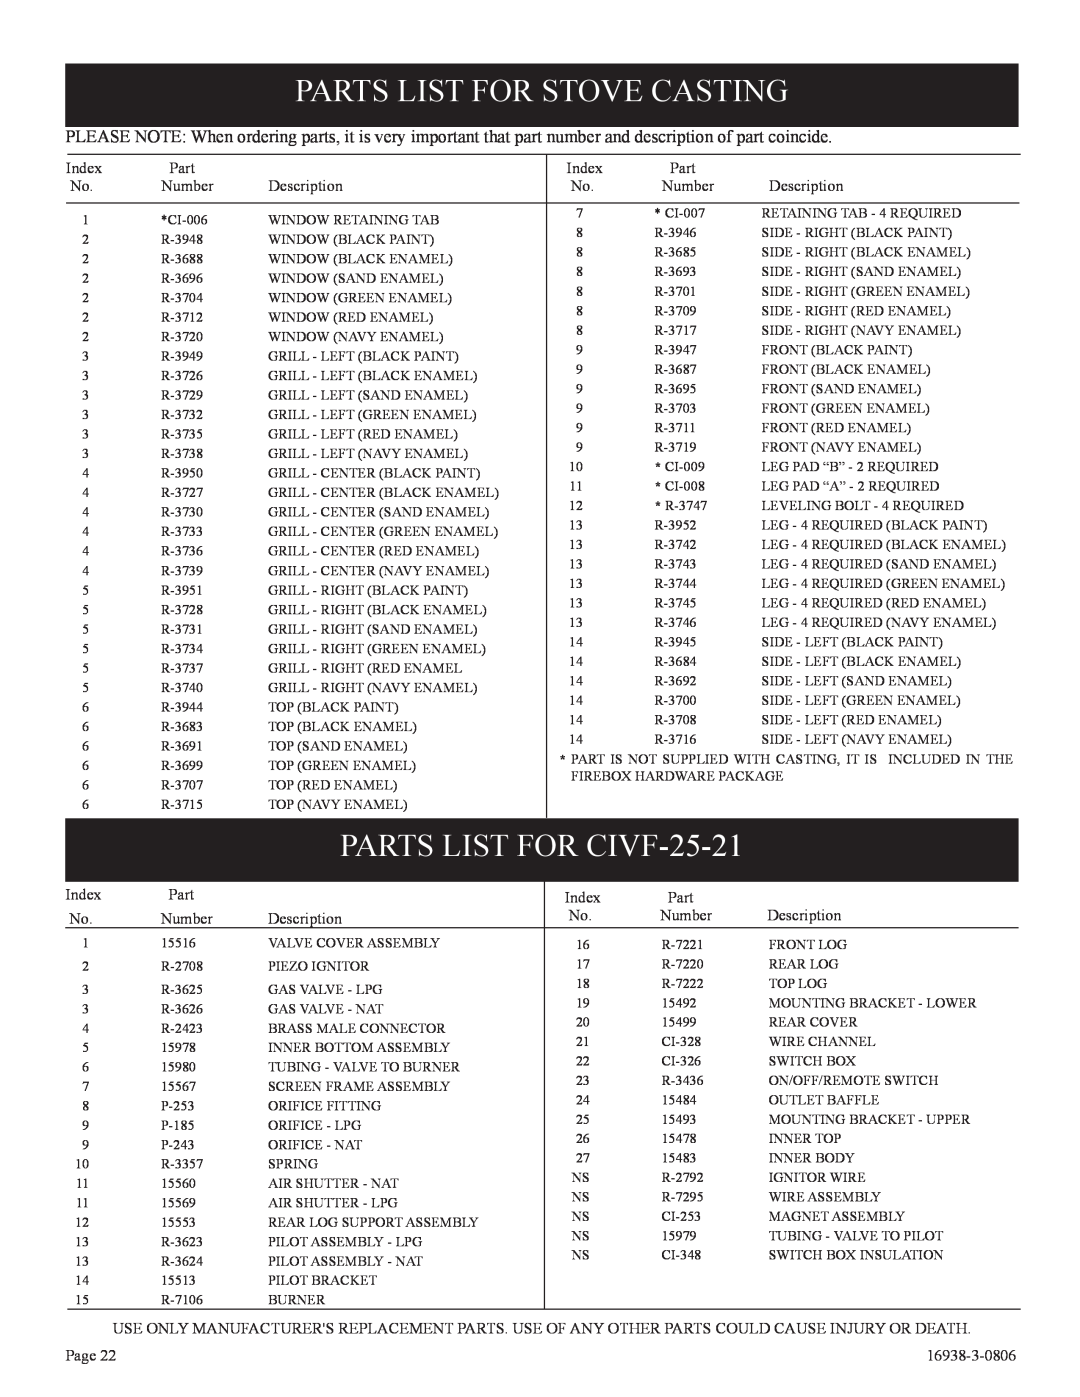 Empire Comfort Systems installation instructions Parts List For Stove Casting, PARTS LIST FOR CIVF-25-21 